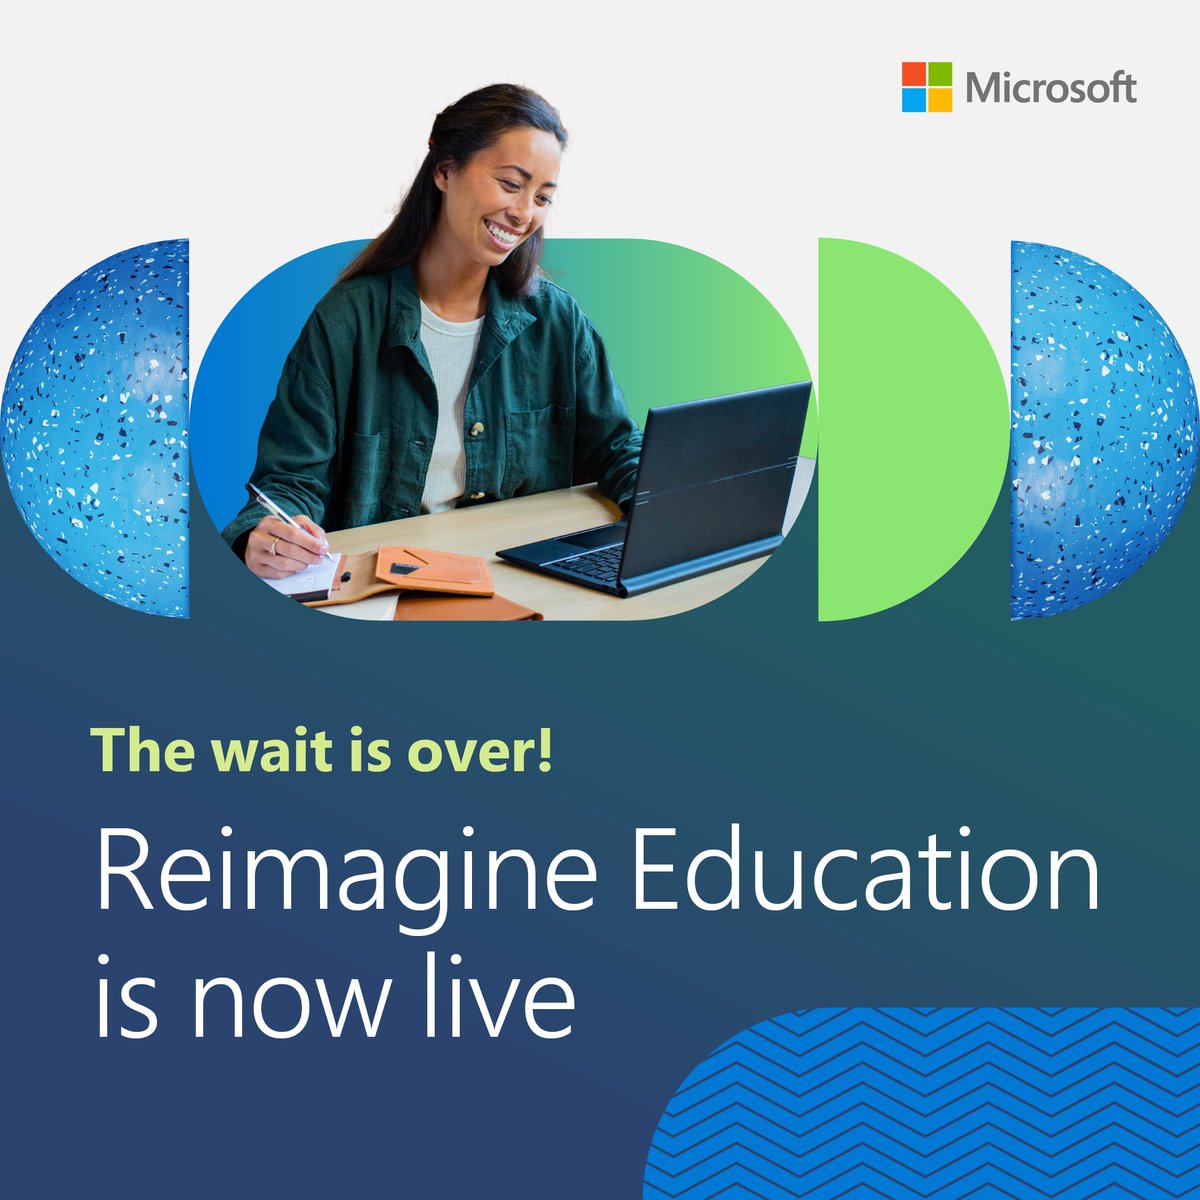 Reimagine Education is live! ​
​
Join the stream to learn how #AI in education brings opportunity to life: youtube.com/live/Slj6H2lEK…
​
#MicrosoftEDU #MicrosoftReimagine